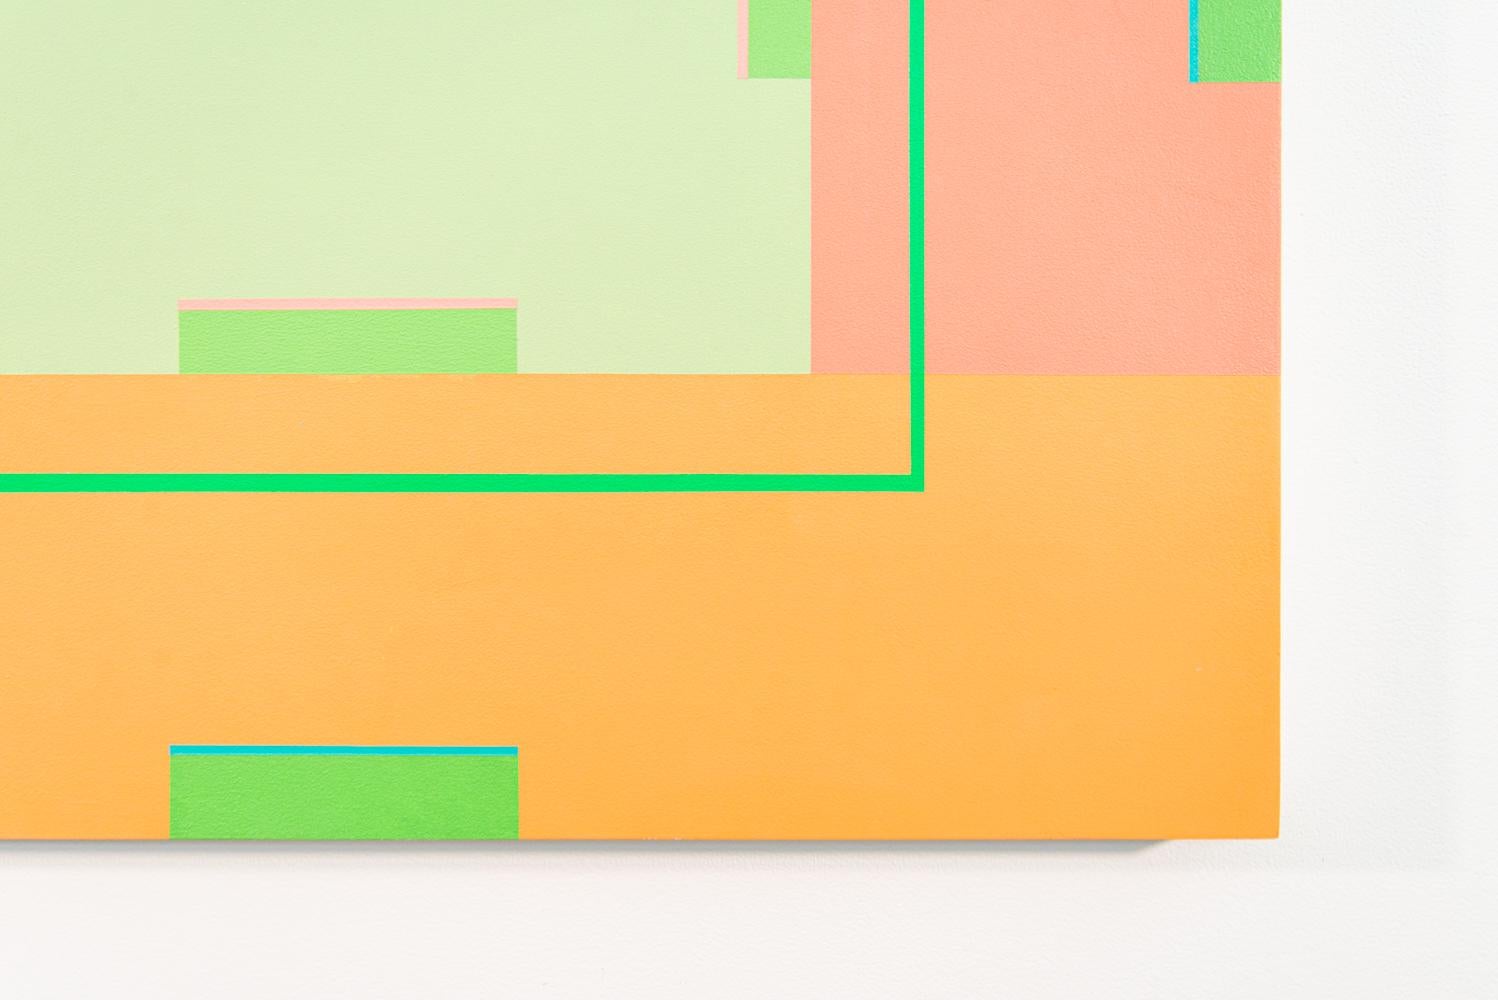 Modernist Burton Kramer’s delightful compositions play with geometric shapes enhanced by a lively colour palette. This acrylic piece has a central square in turquoise complemented by muted tones of apricot, green, and burnt orange rectangles and